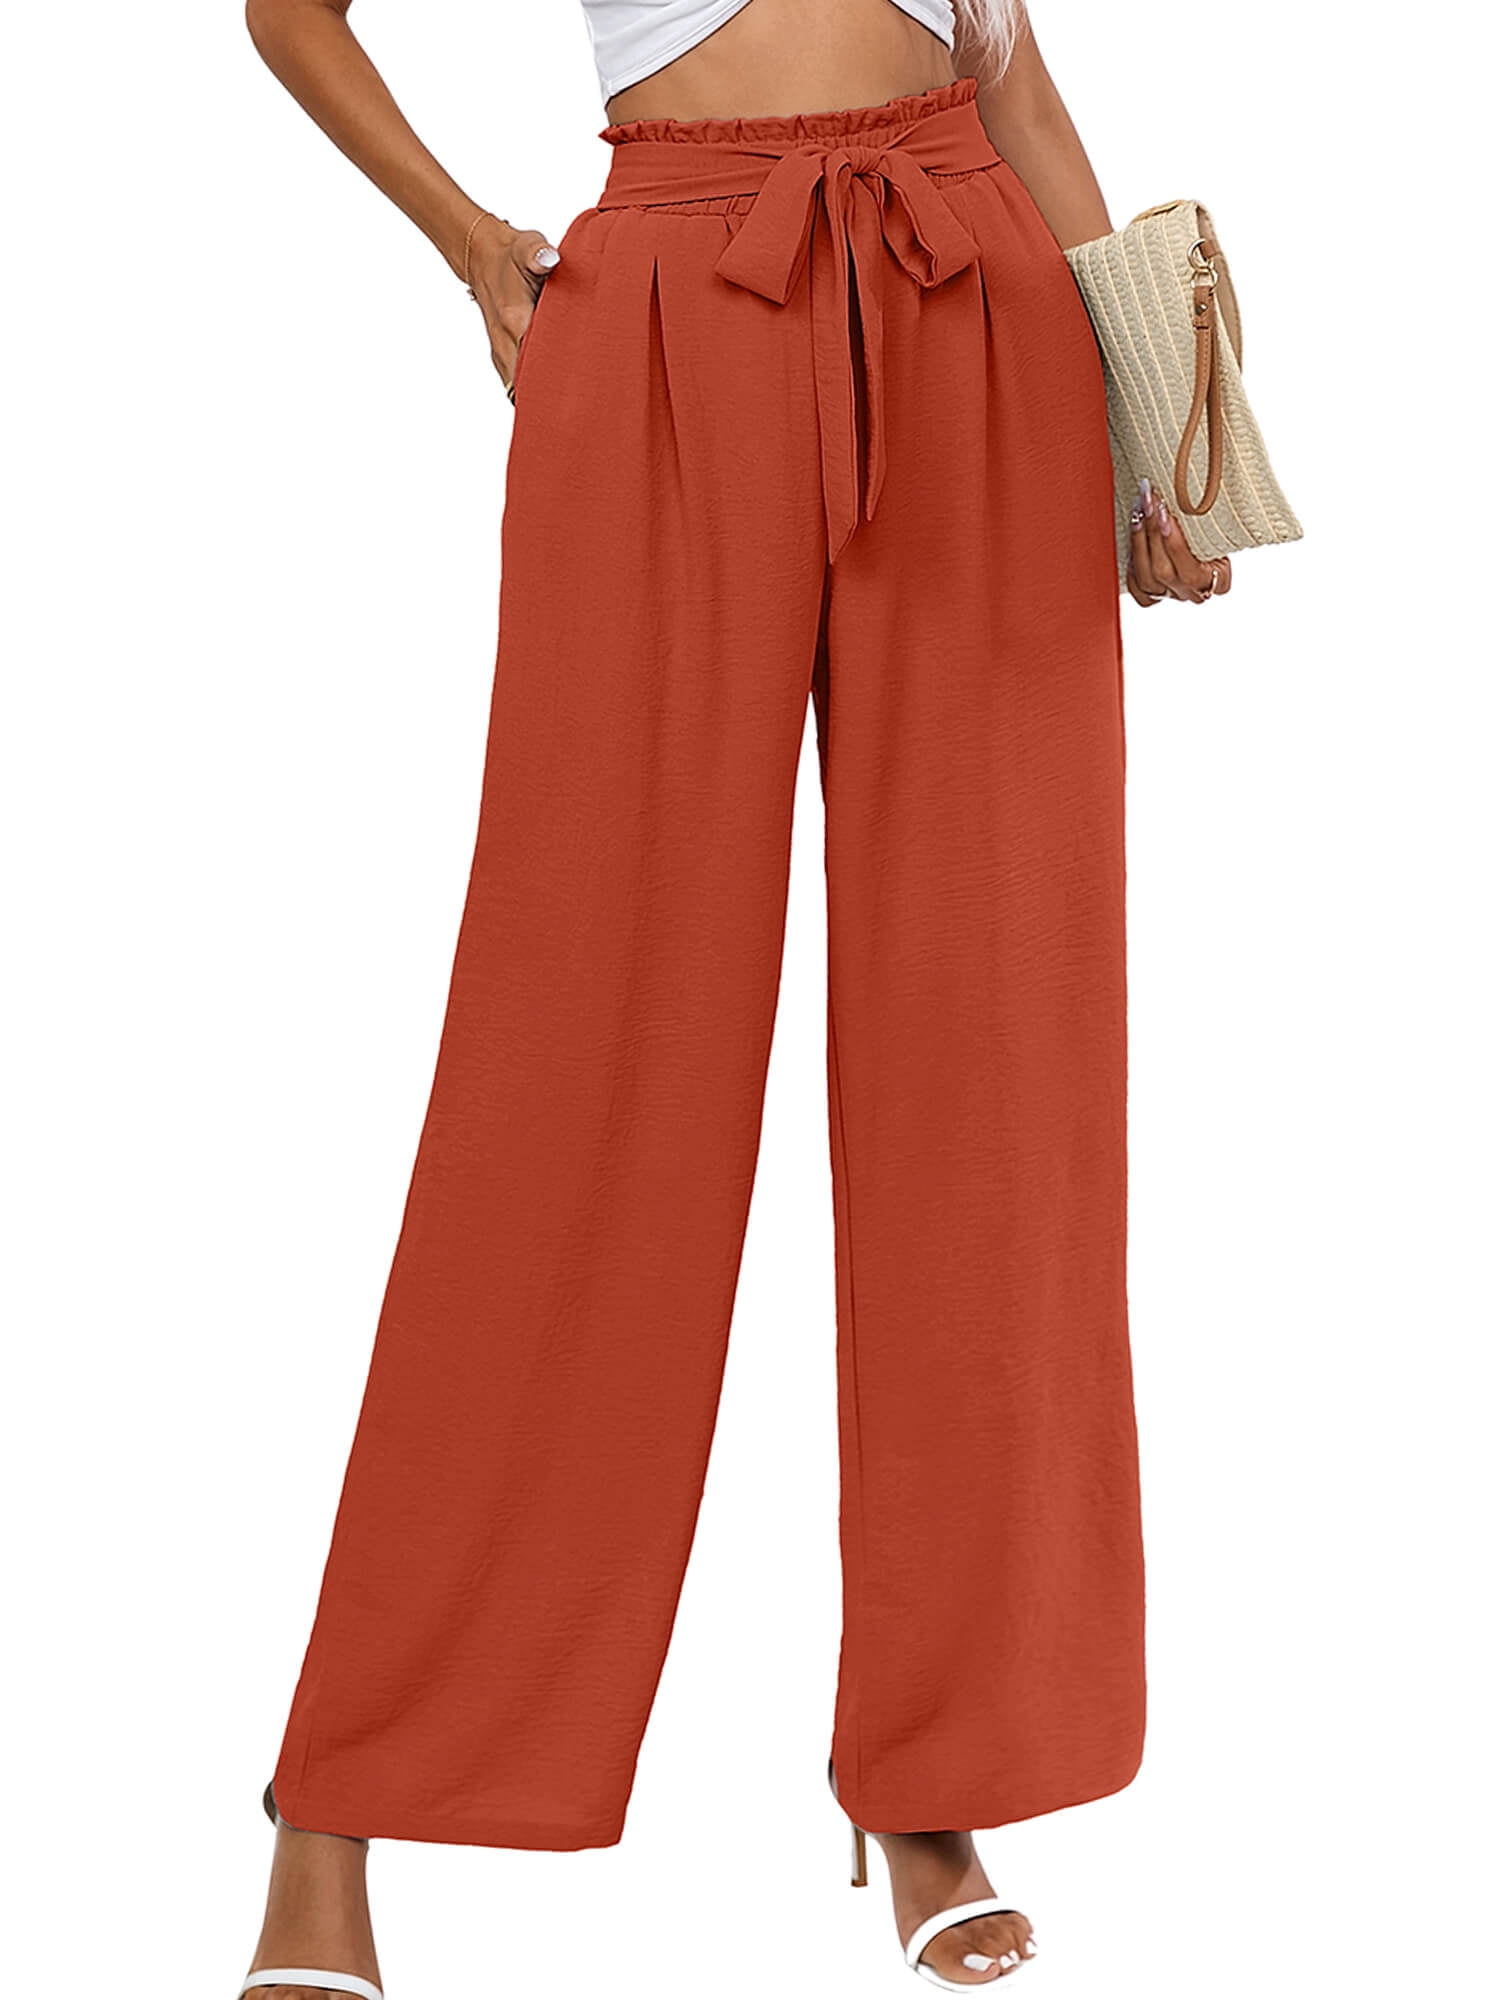 Chiclily Women's Belted Wide Leg Pants with Pockets Lightweight